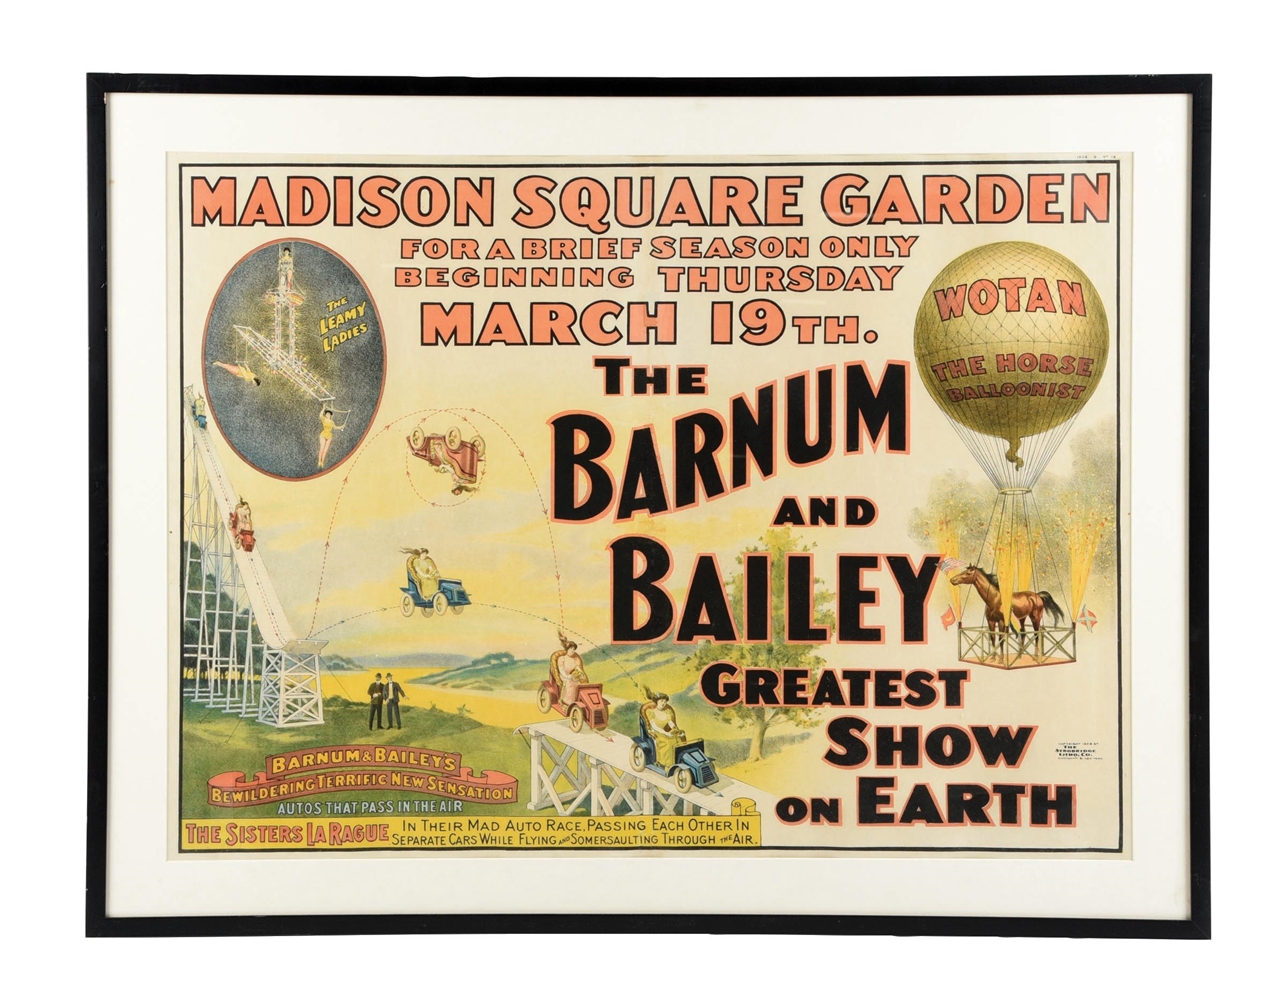 THE BARNUM AND BAILEY "GREATEST SHOW ON EARTH" PAPER LITHOGRAPH CIRCUS POSTER W/ THE SISTERS LARAGUE GRAPHIC